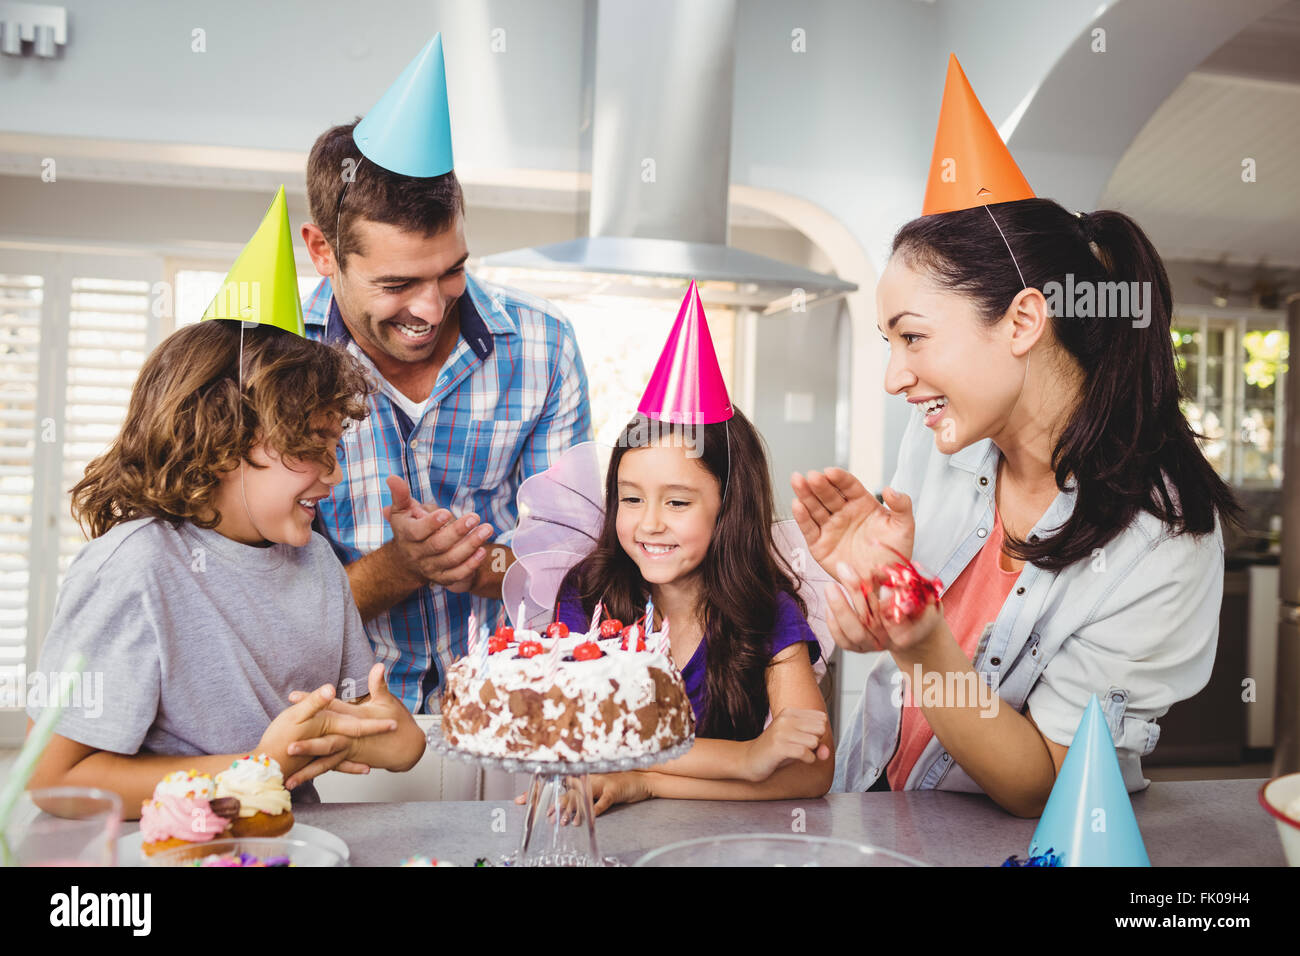 Happy family clapping during birthday celebration Stock Photo